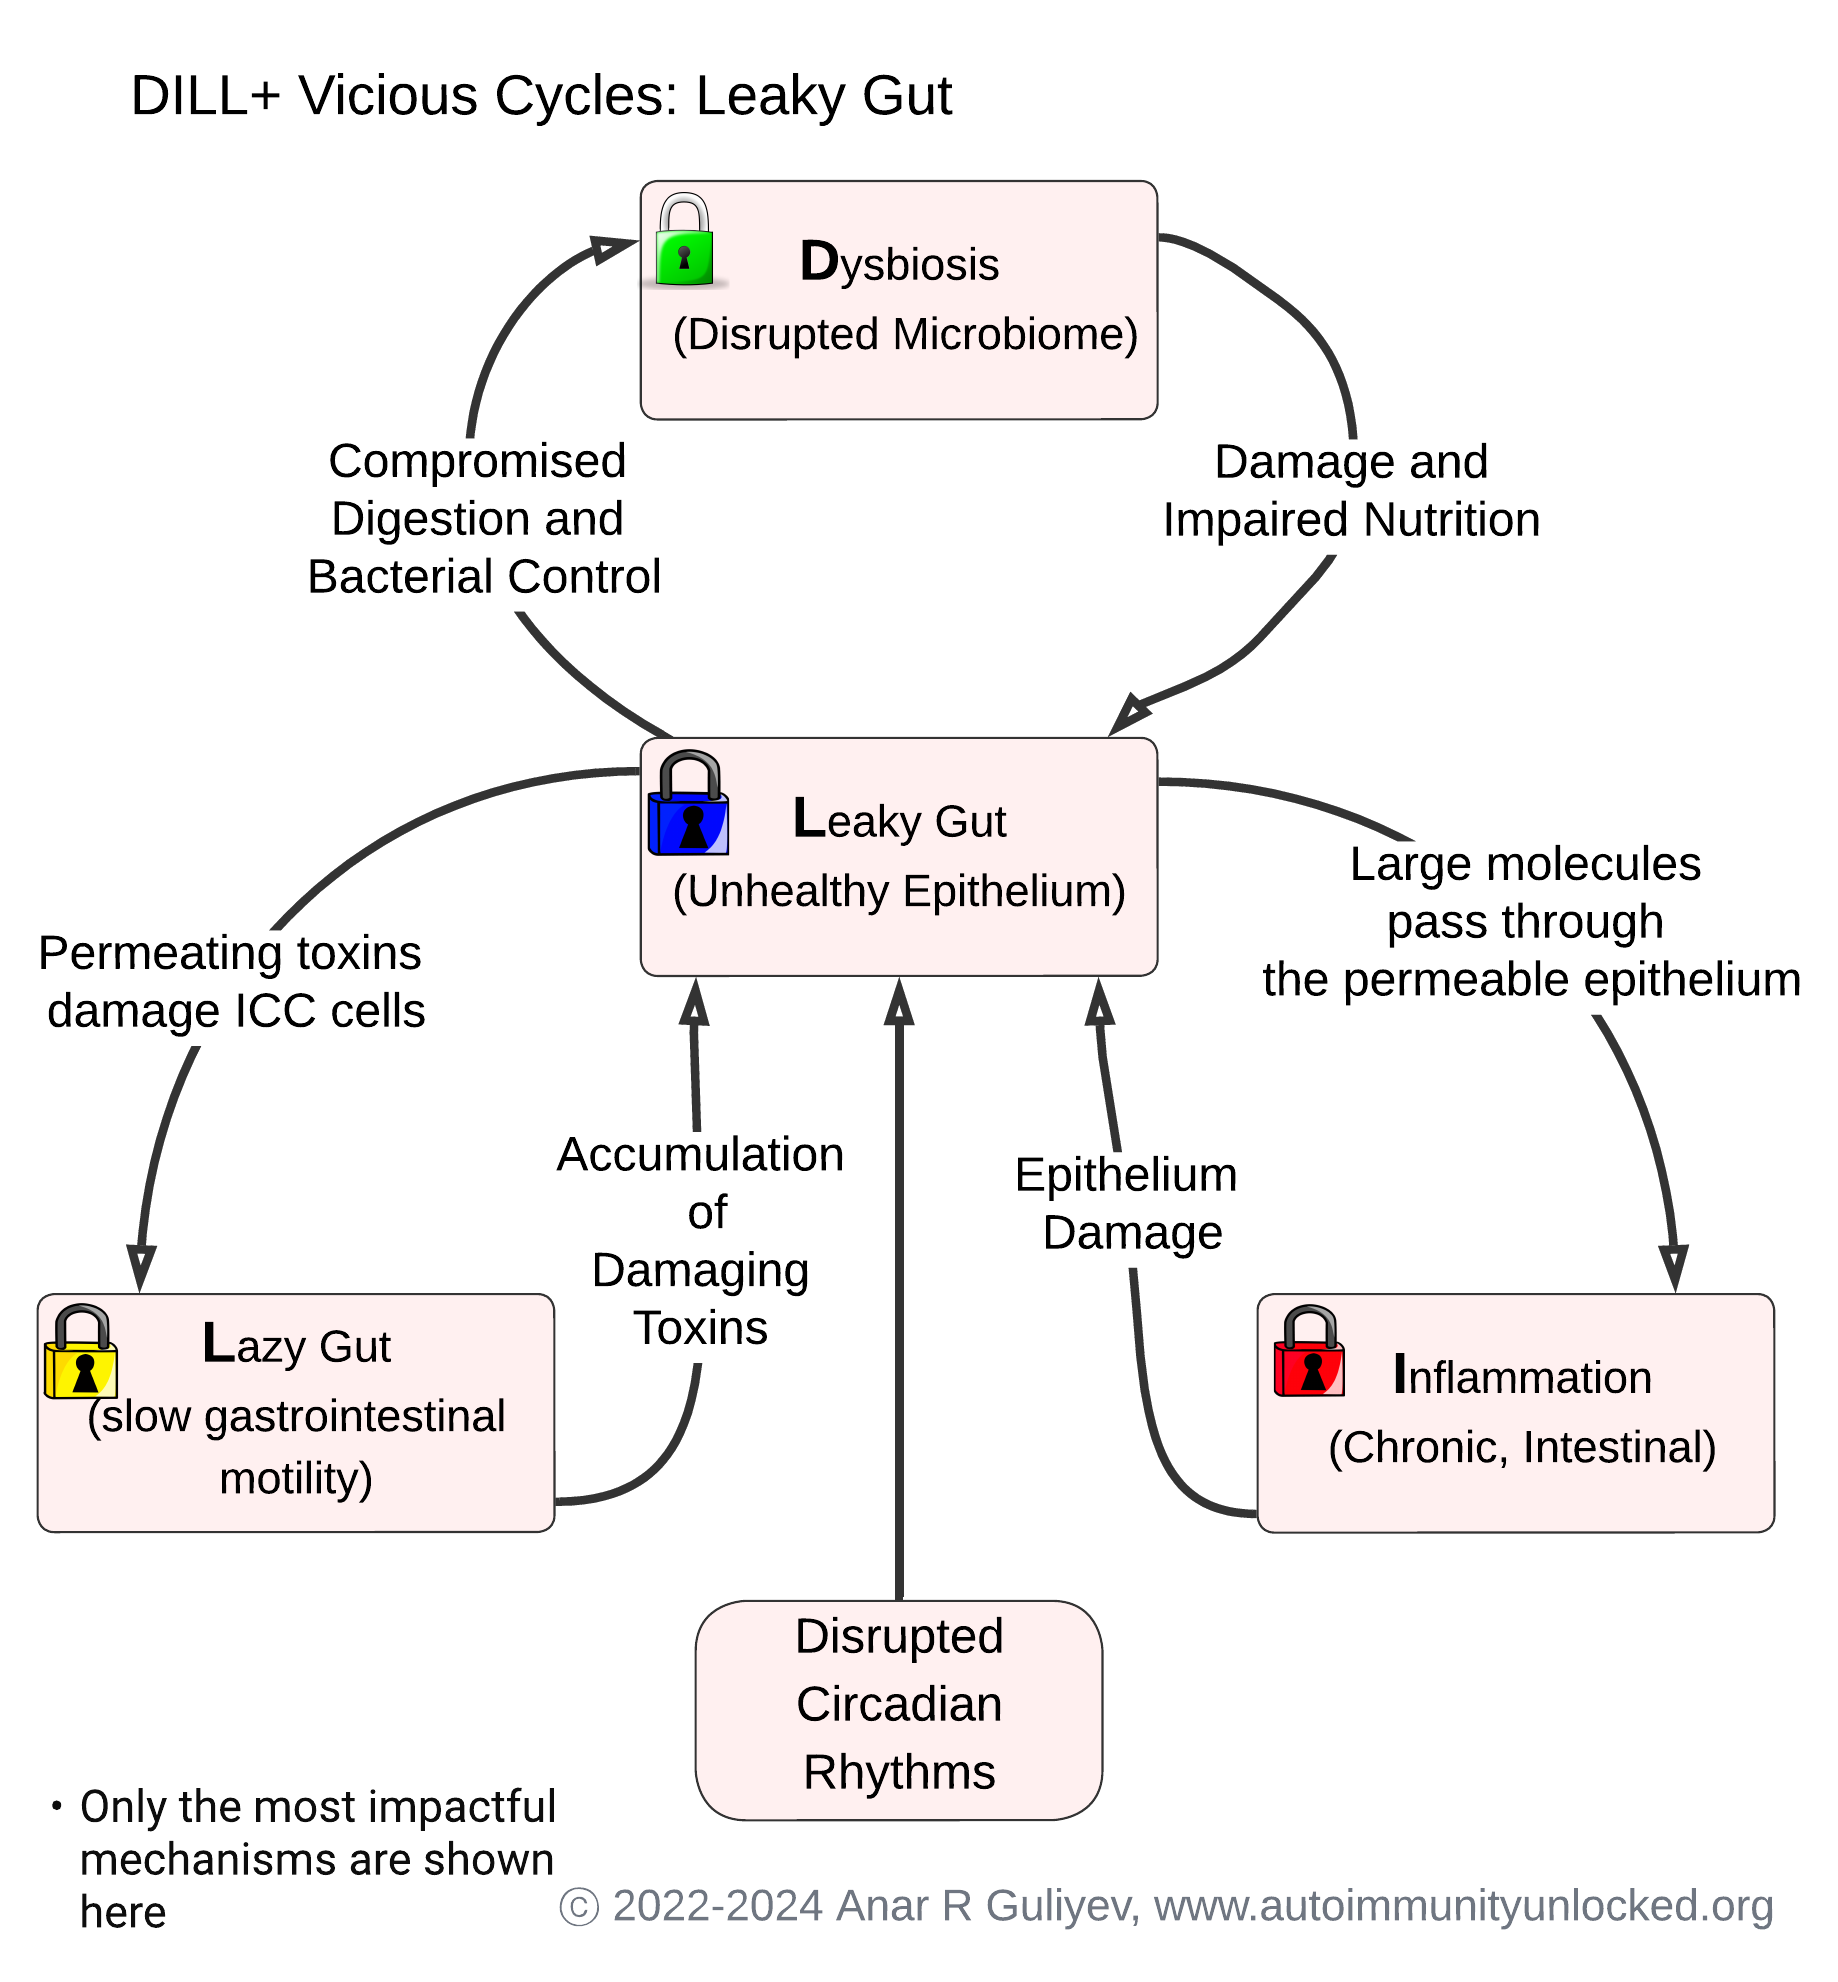 DILL+ Vicious Cycles: Leaky Gut